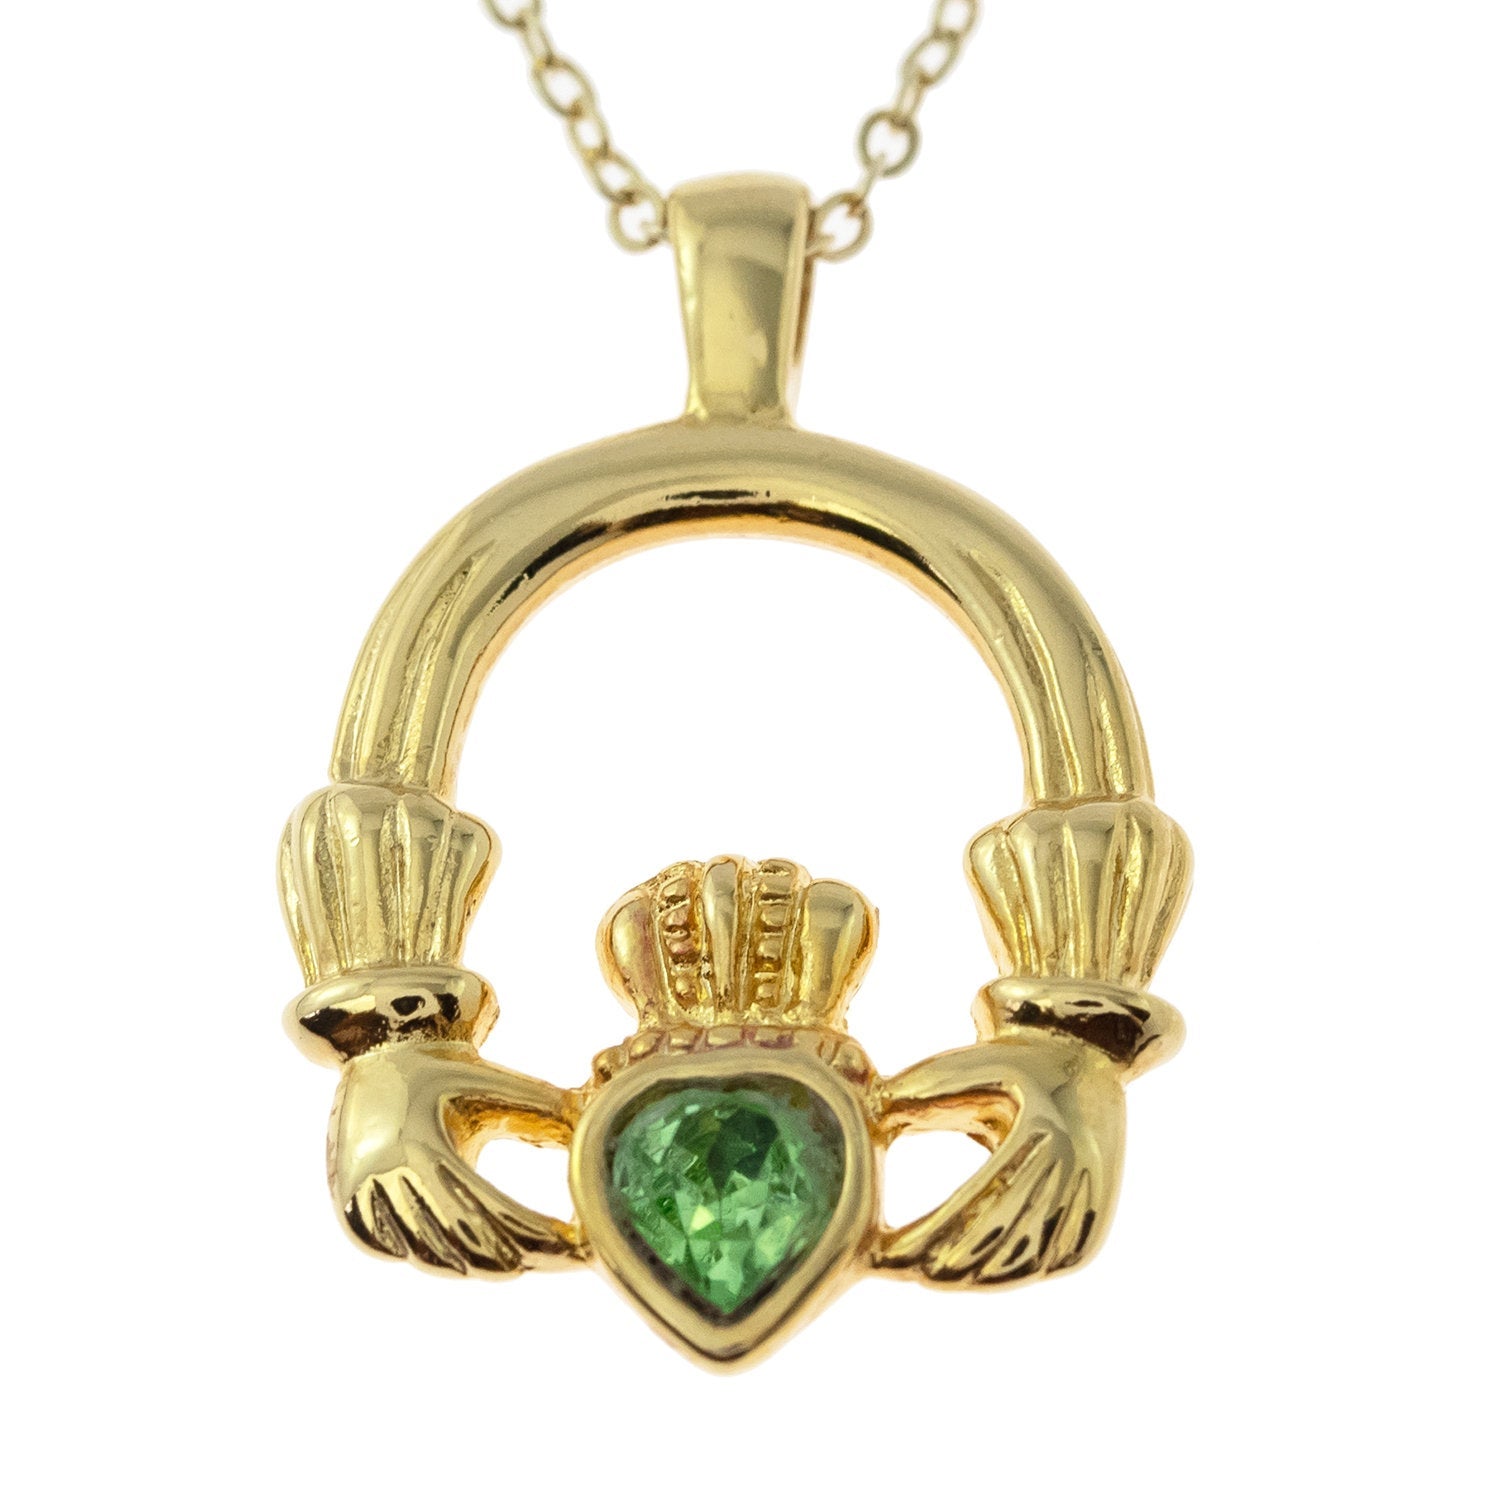 Emerald Claddagh Necklace - White Gold